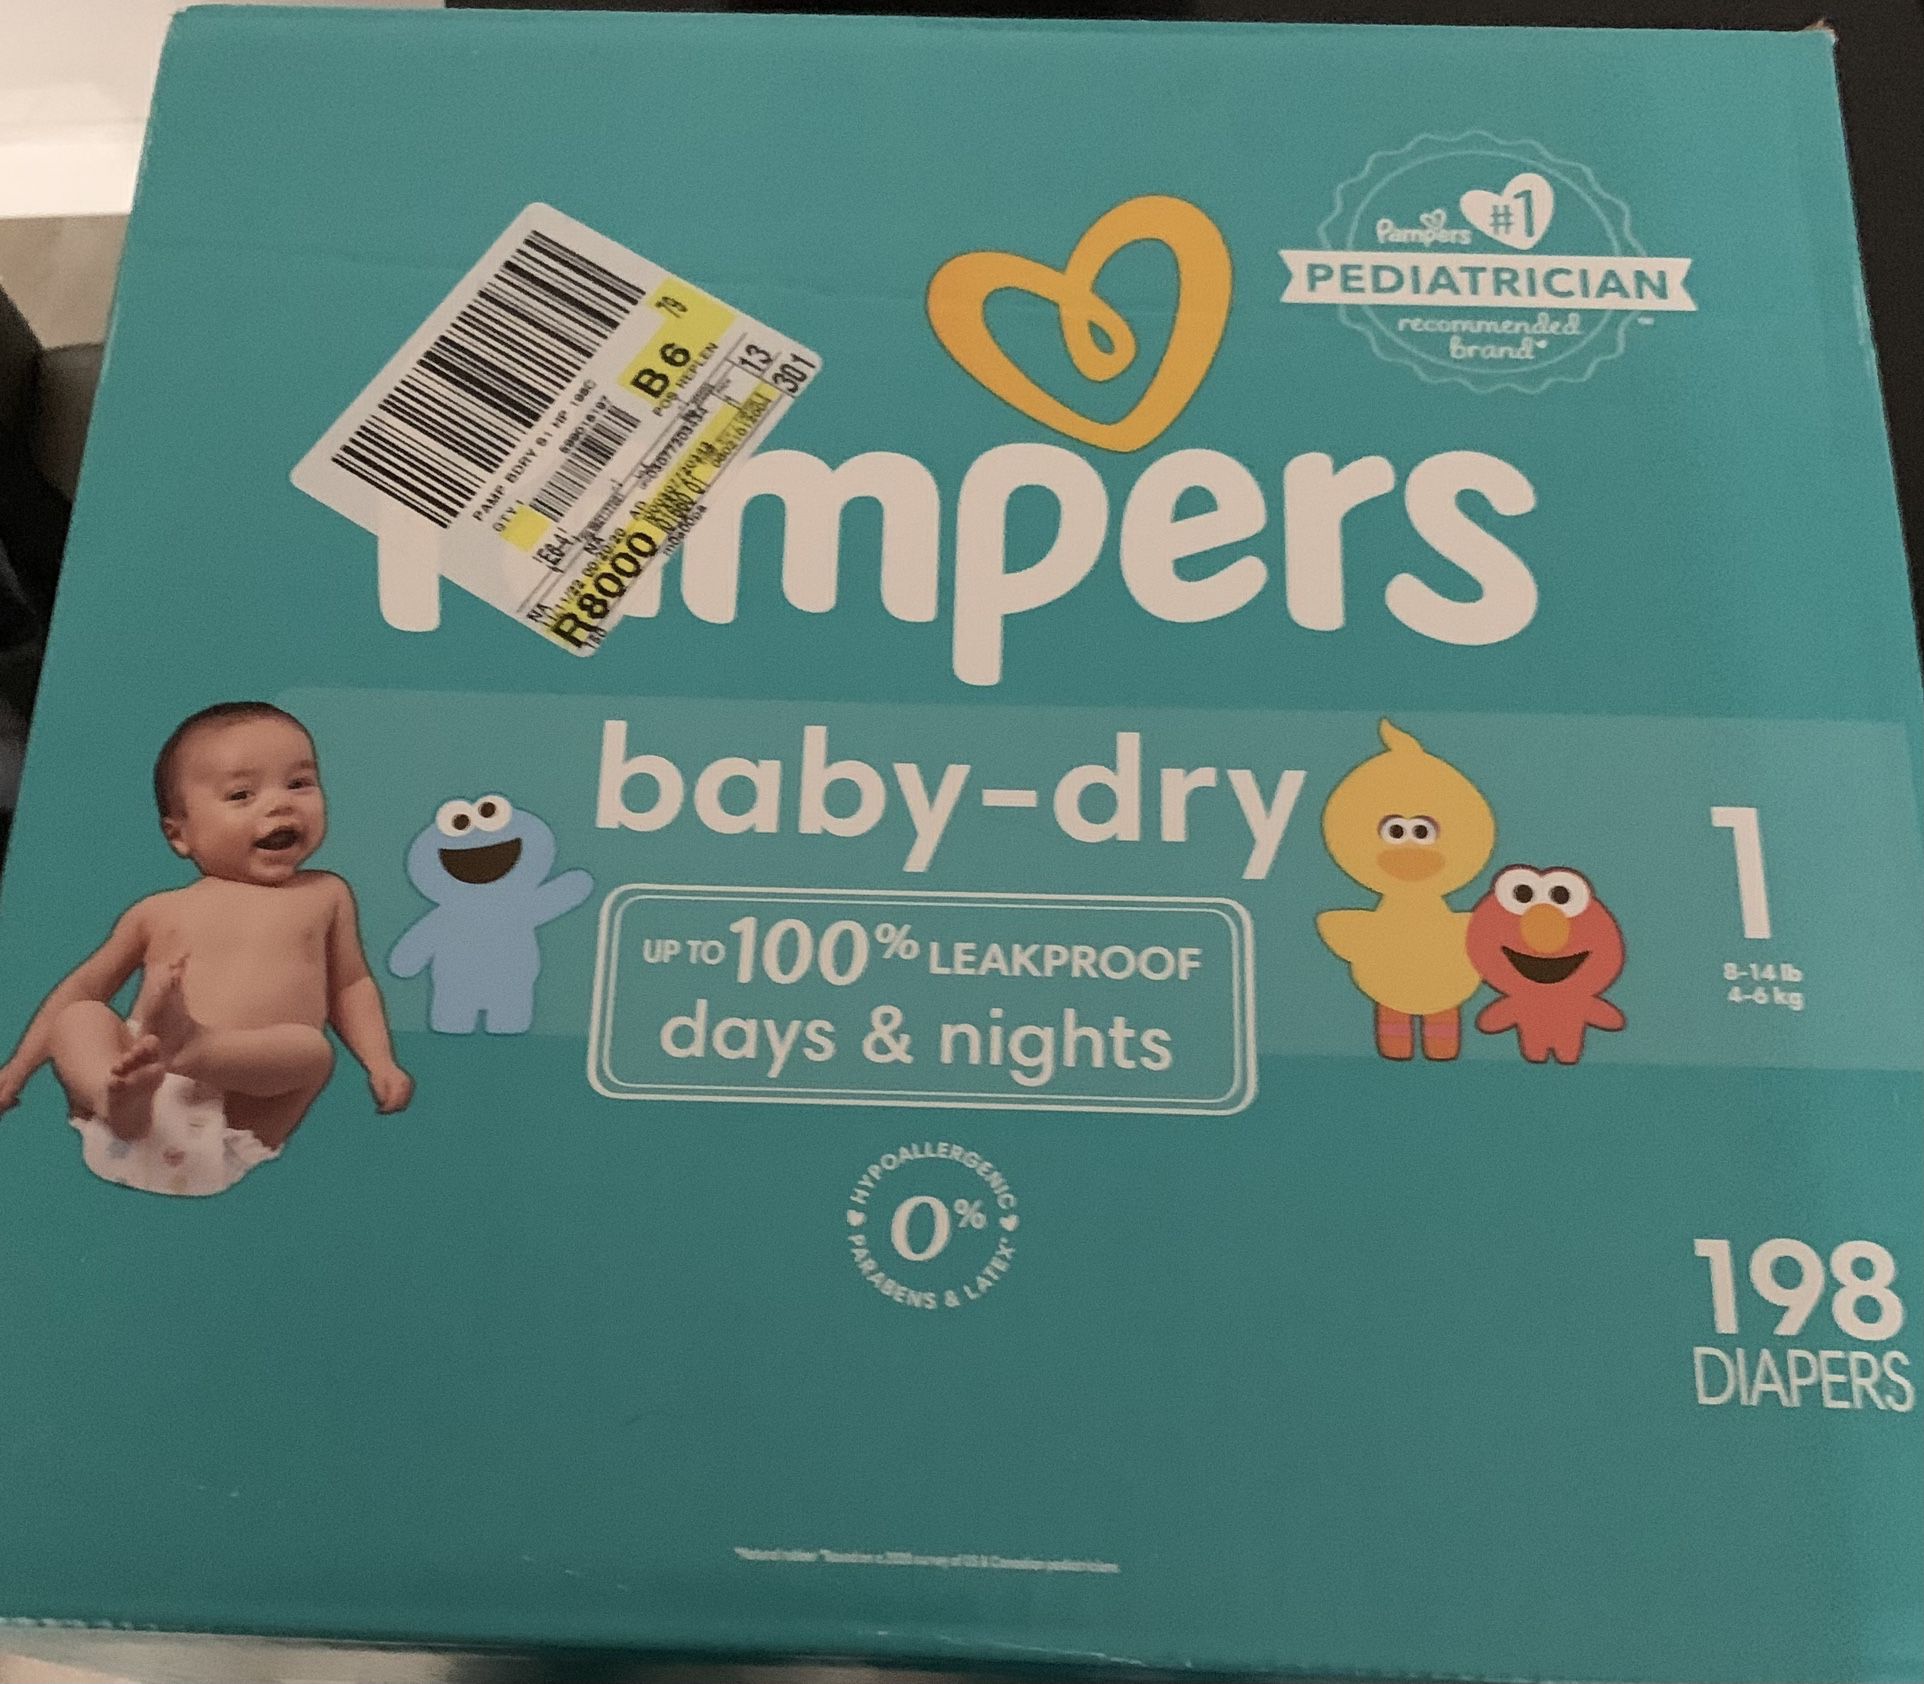 Pampers baby-dry size 1